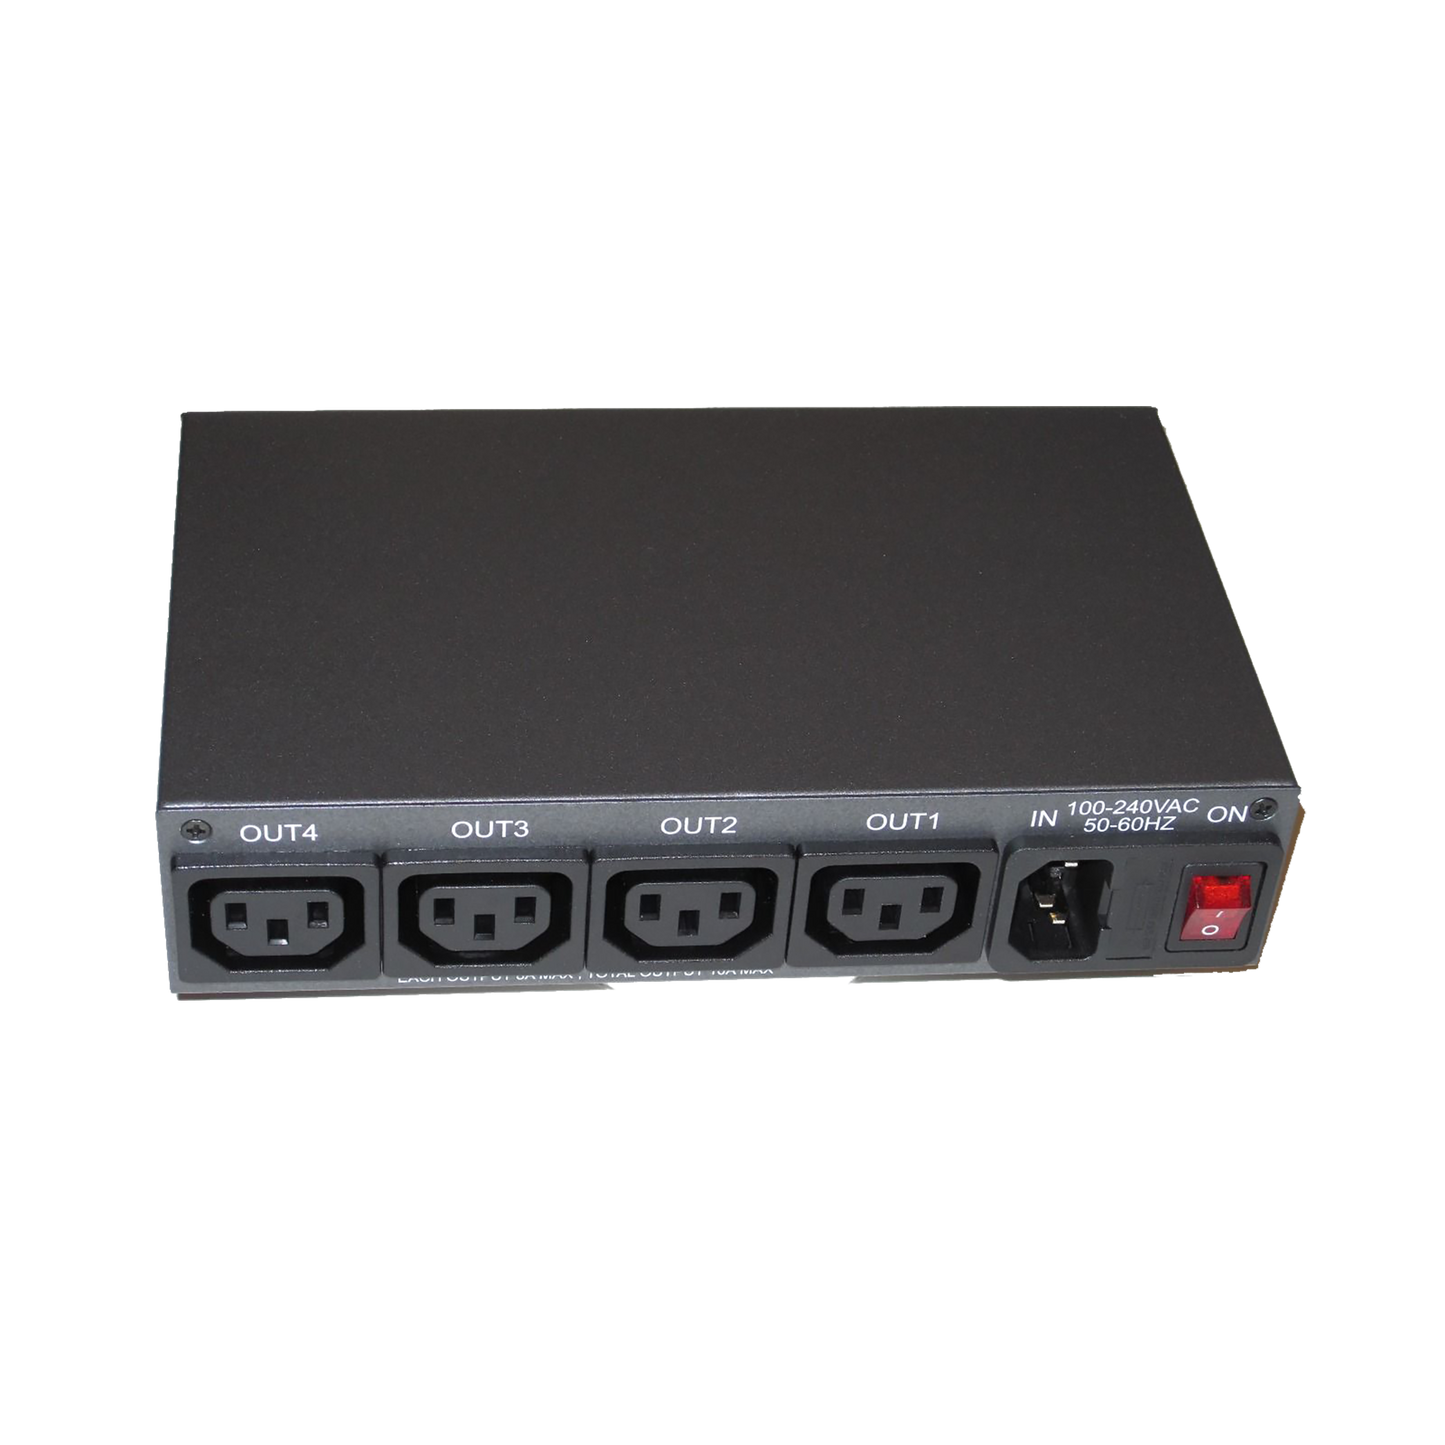 Aviosys IP Power Switch 9858MT-S Ethernet Remote Power Switch with 4 Sockets